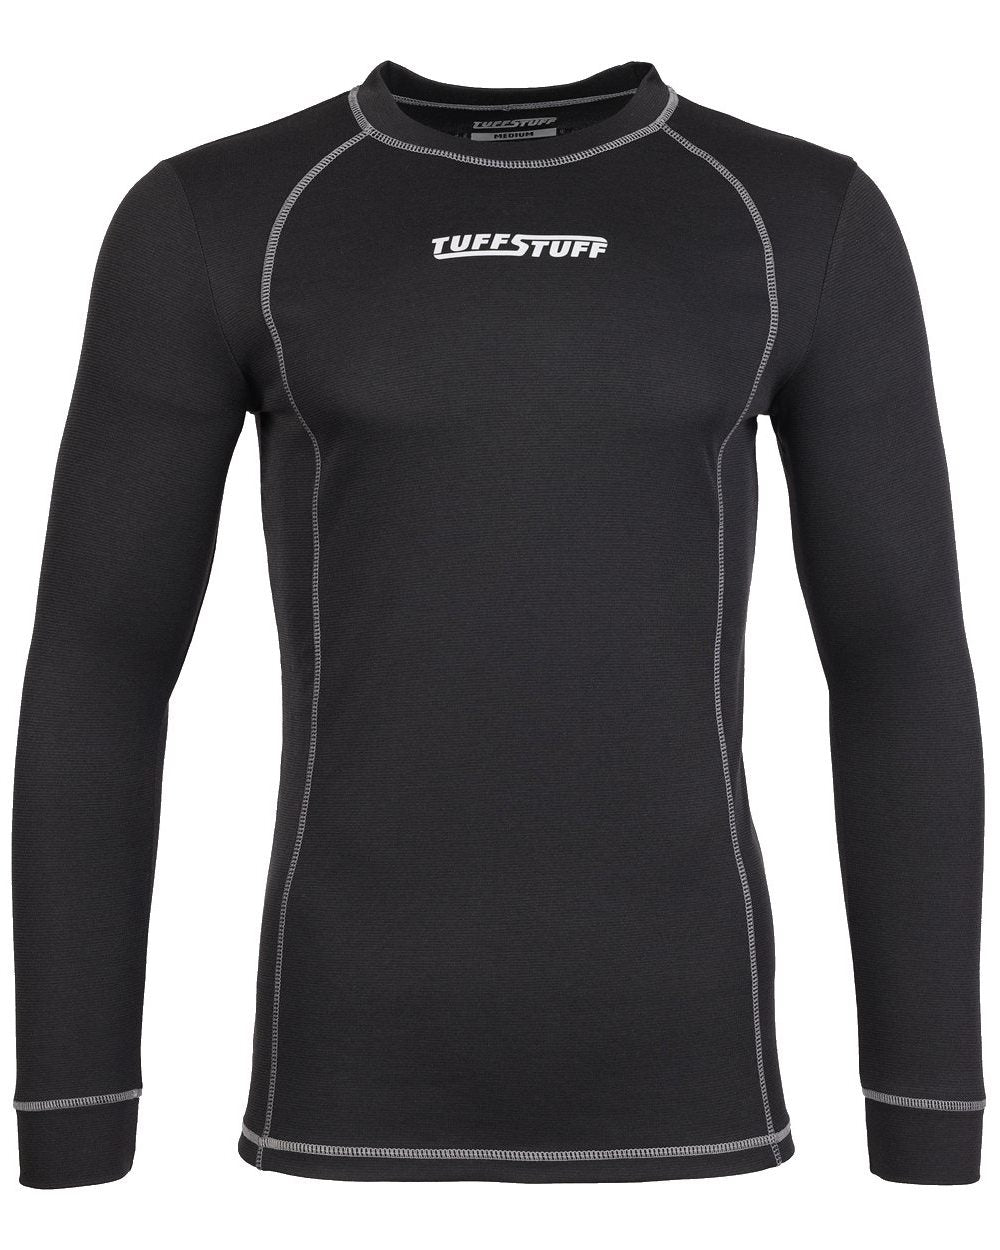 Black Coloured TuffStuff Basewear Long Sleeve T-Shirt On A White Background